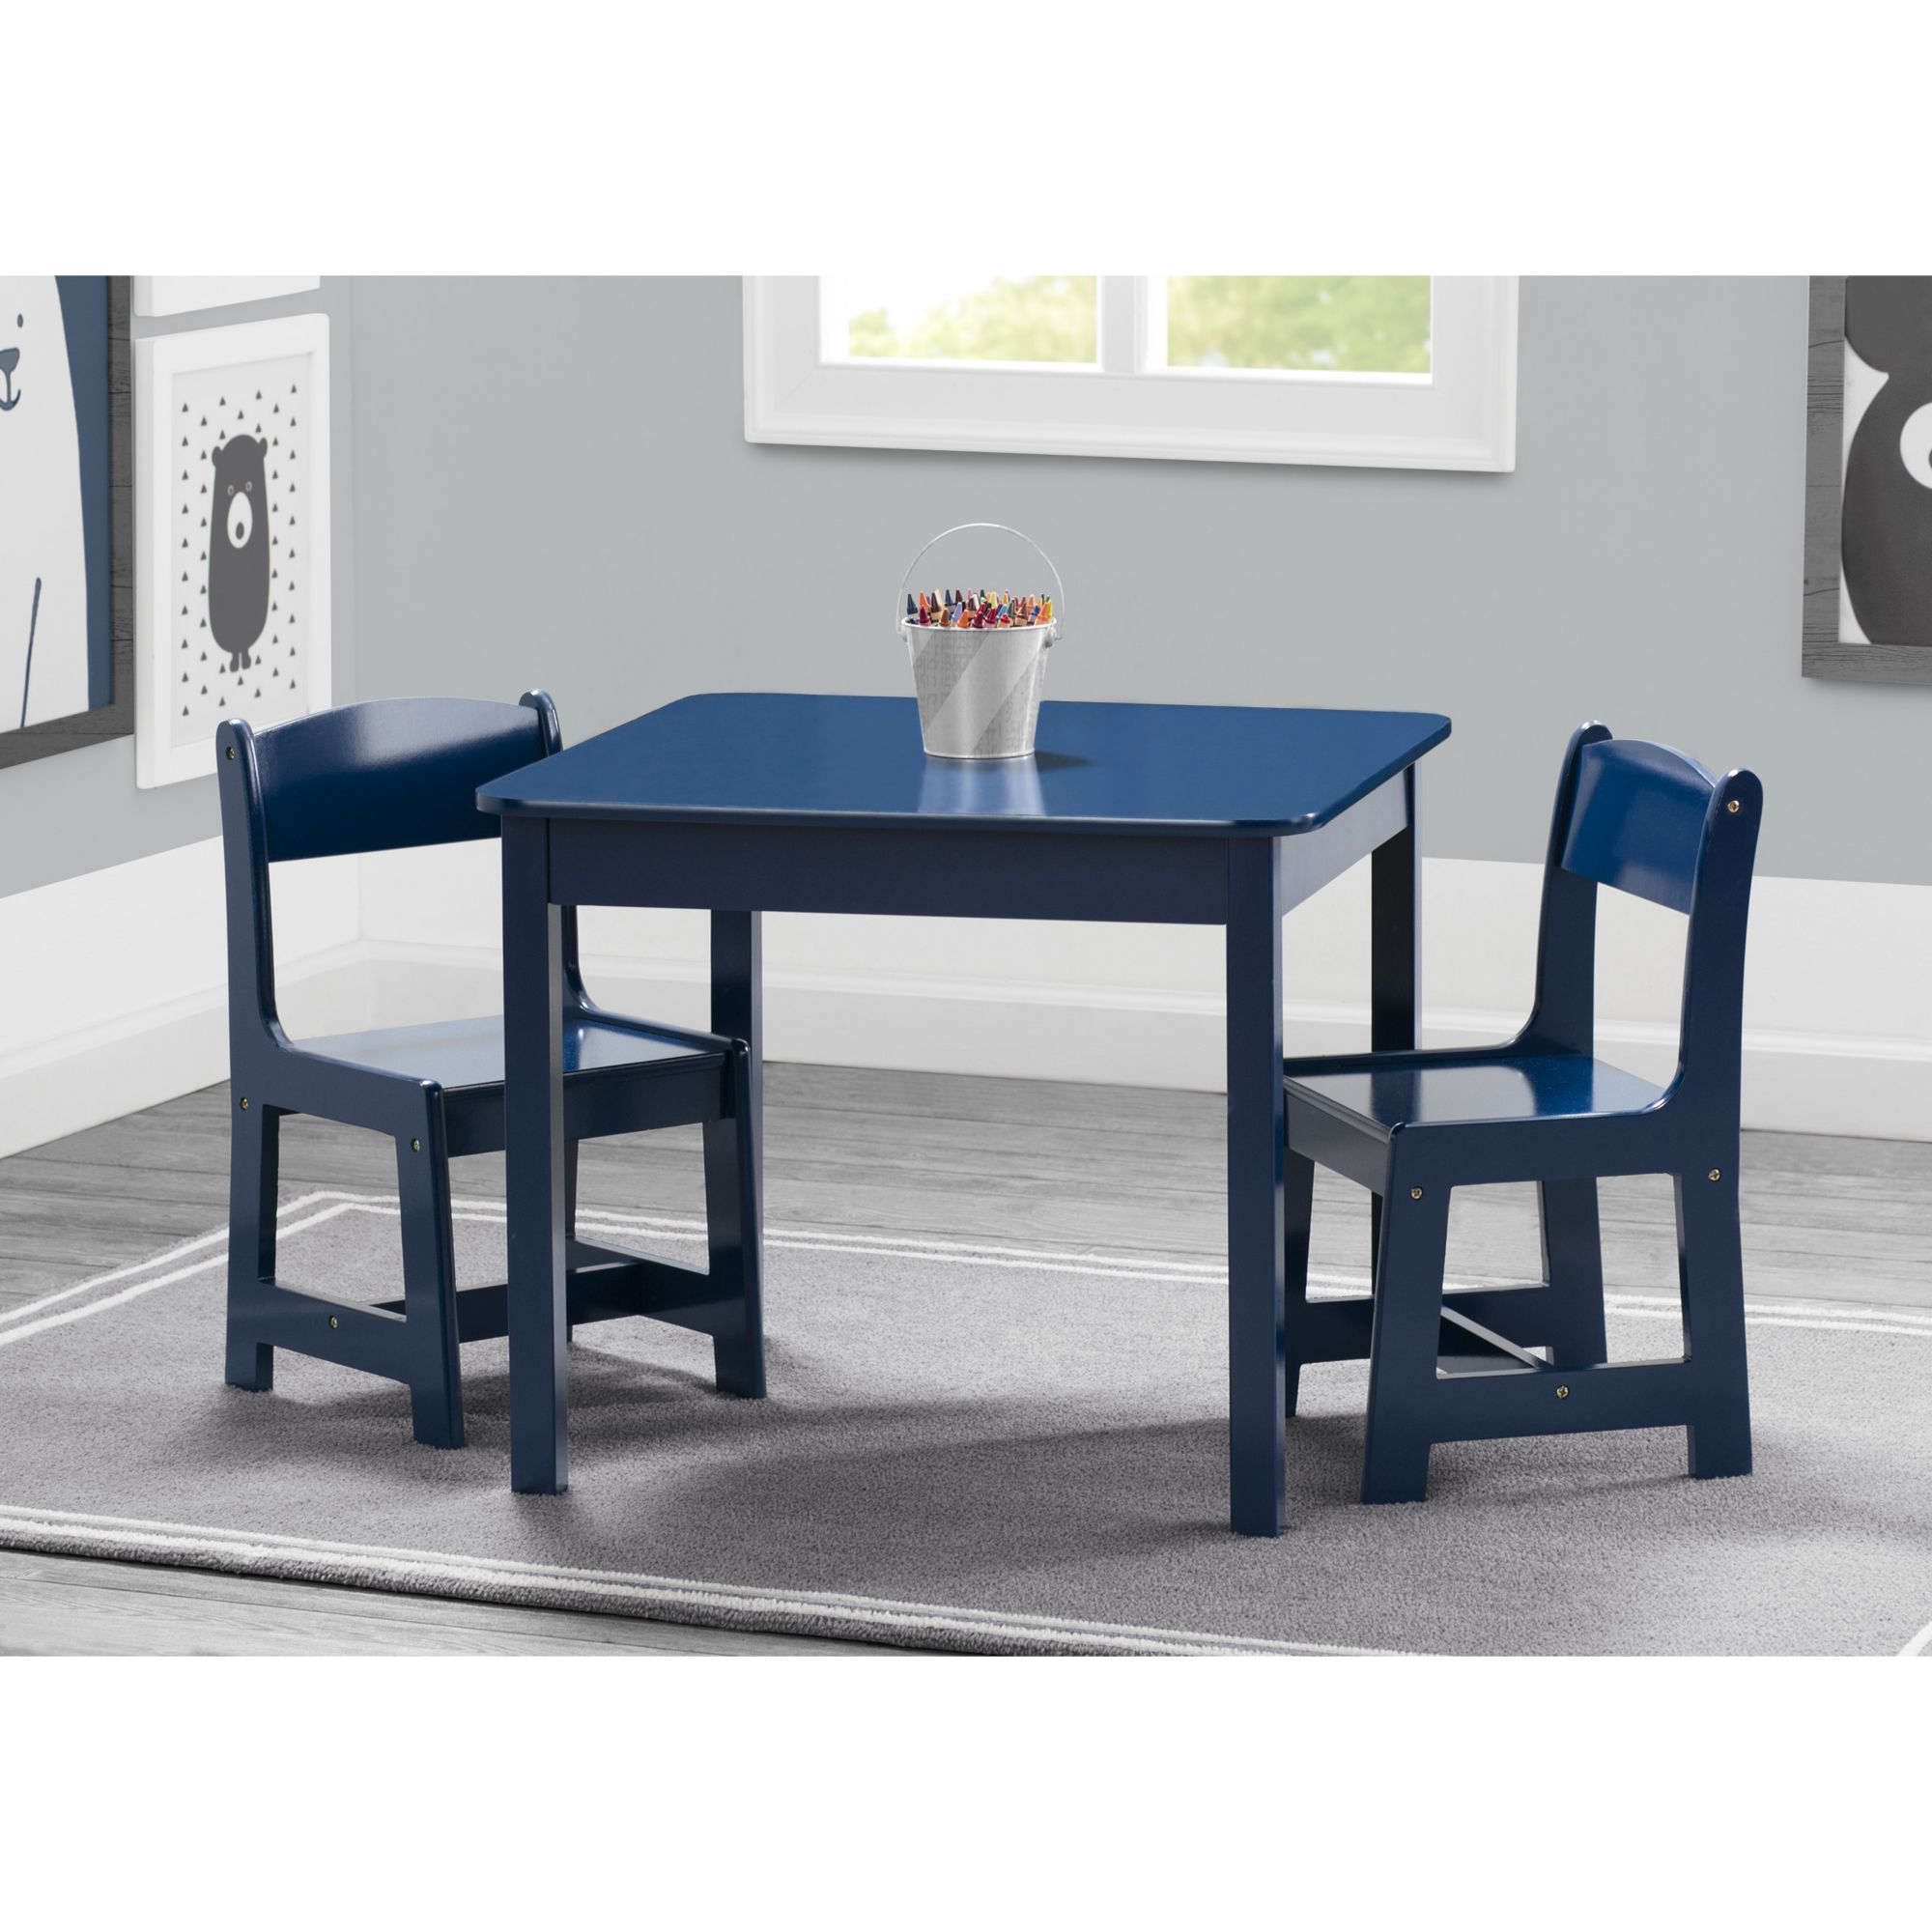 Delta Children MySize Table and Chairs Set - Blue